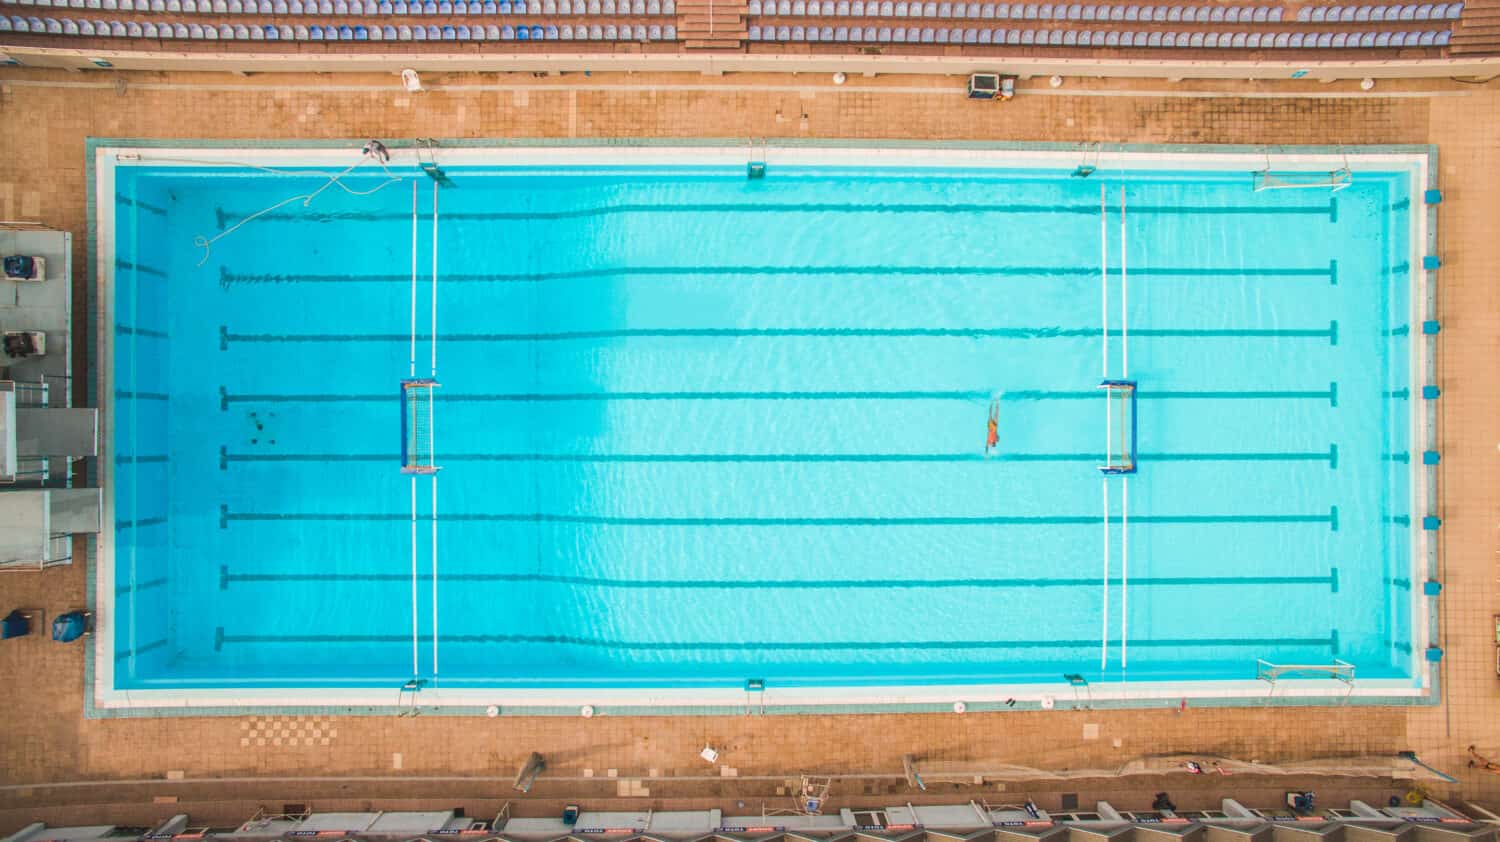 Aerial top view of a swimming pool